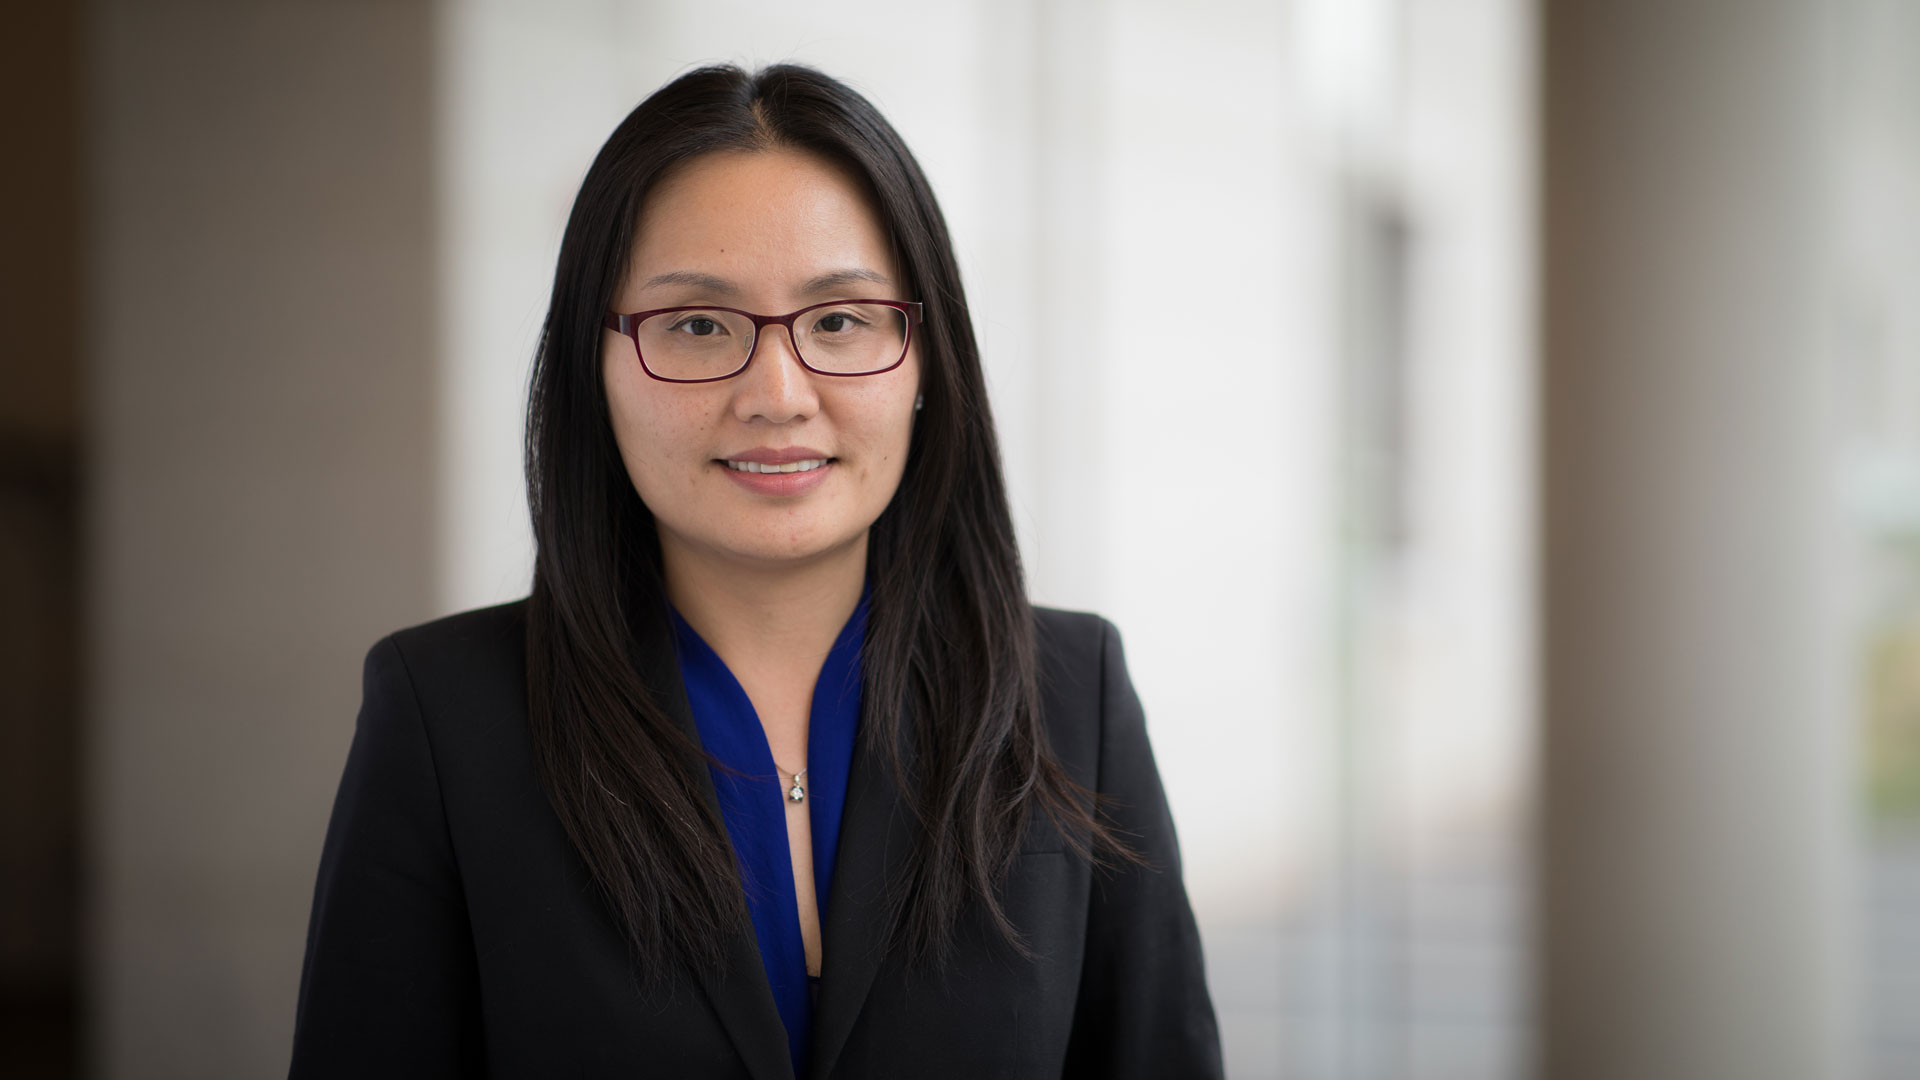 Dr. Wei Chen received a 5-year NIH R01 grant to study calciprotein particles and vascular calcification in patients with chronic kidney disease.